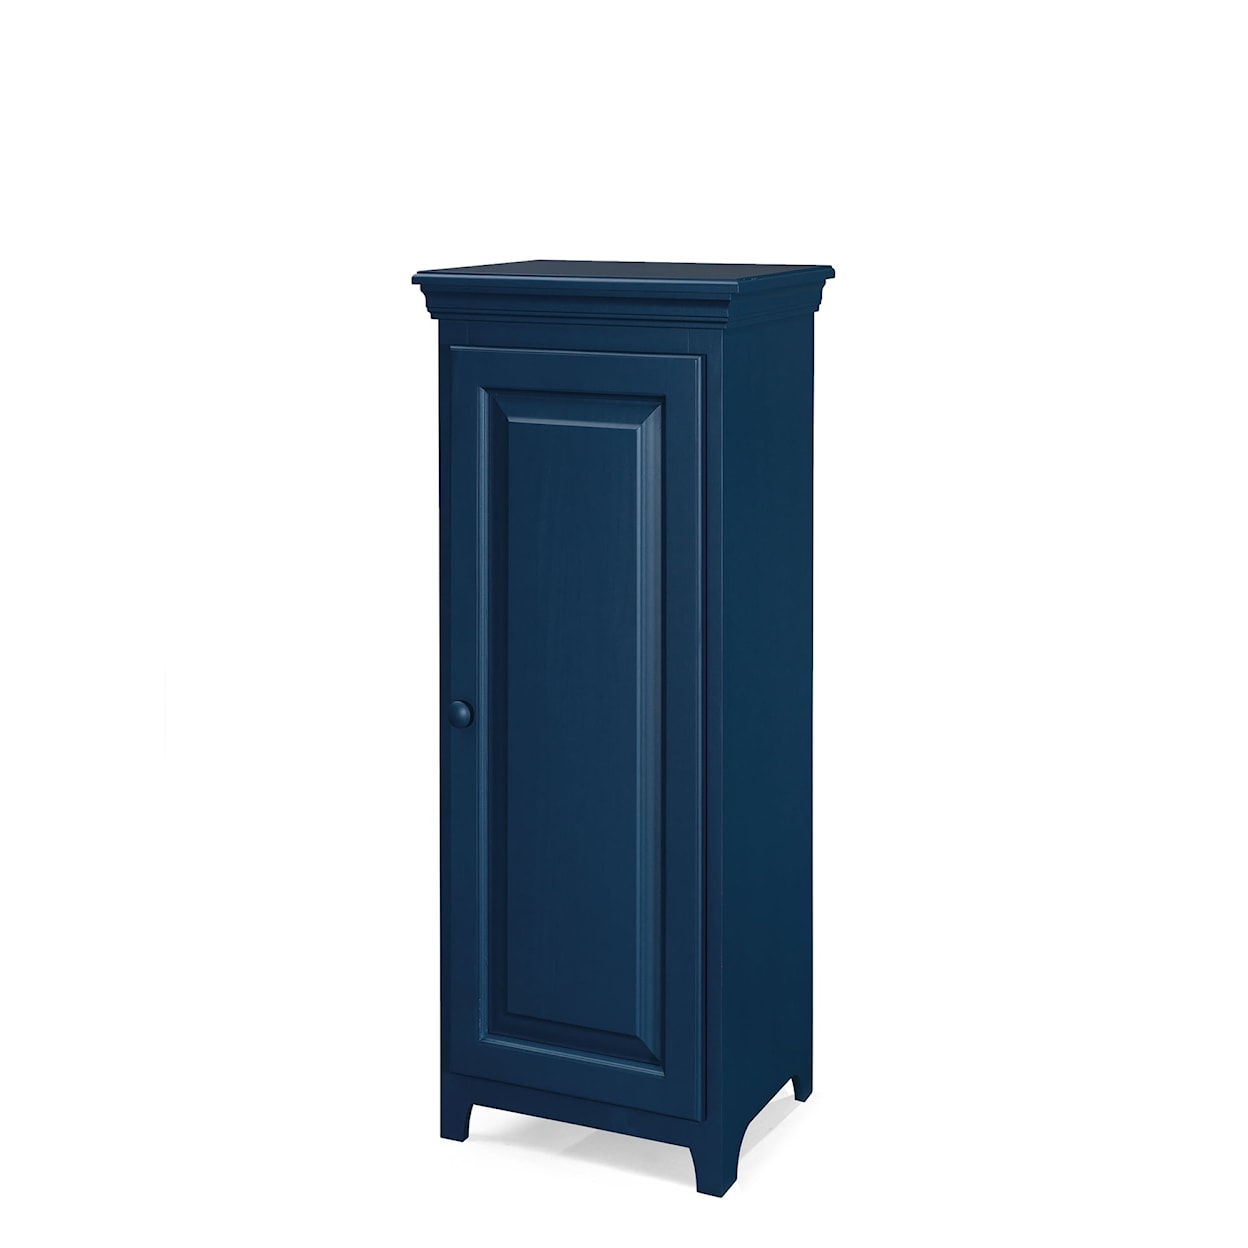 Archbold Furniture Pantries and Cabinets 1 Door Jelly Cabinet